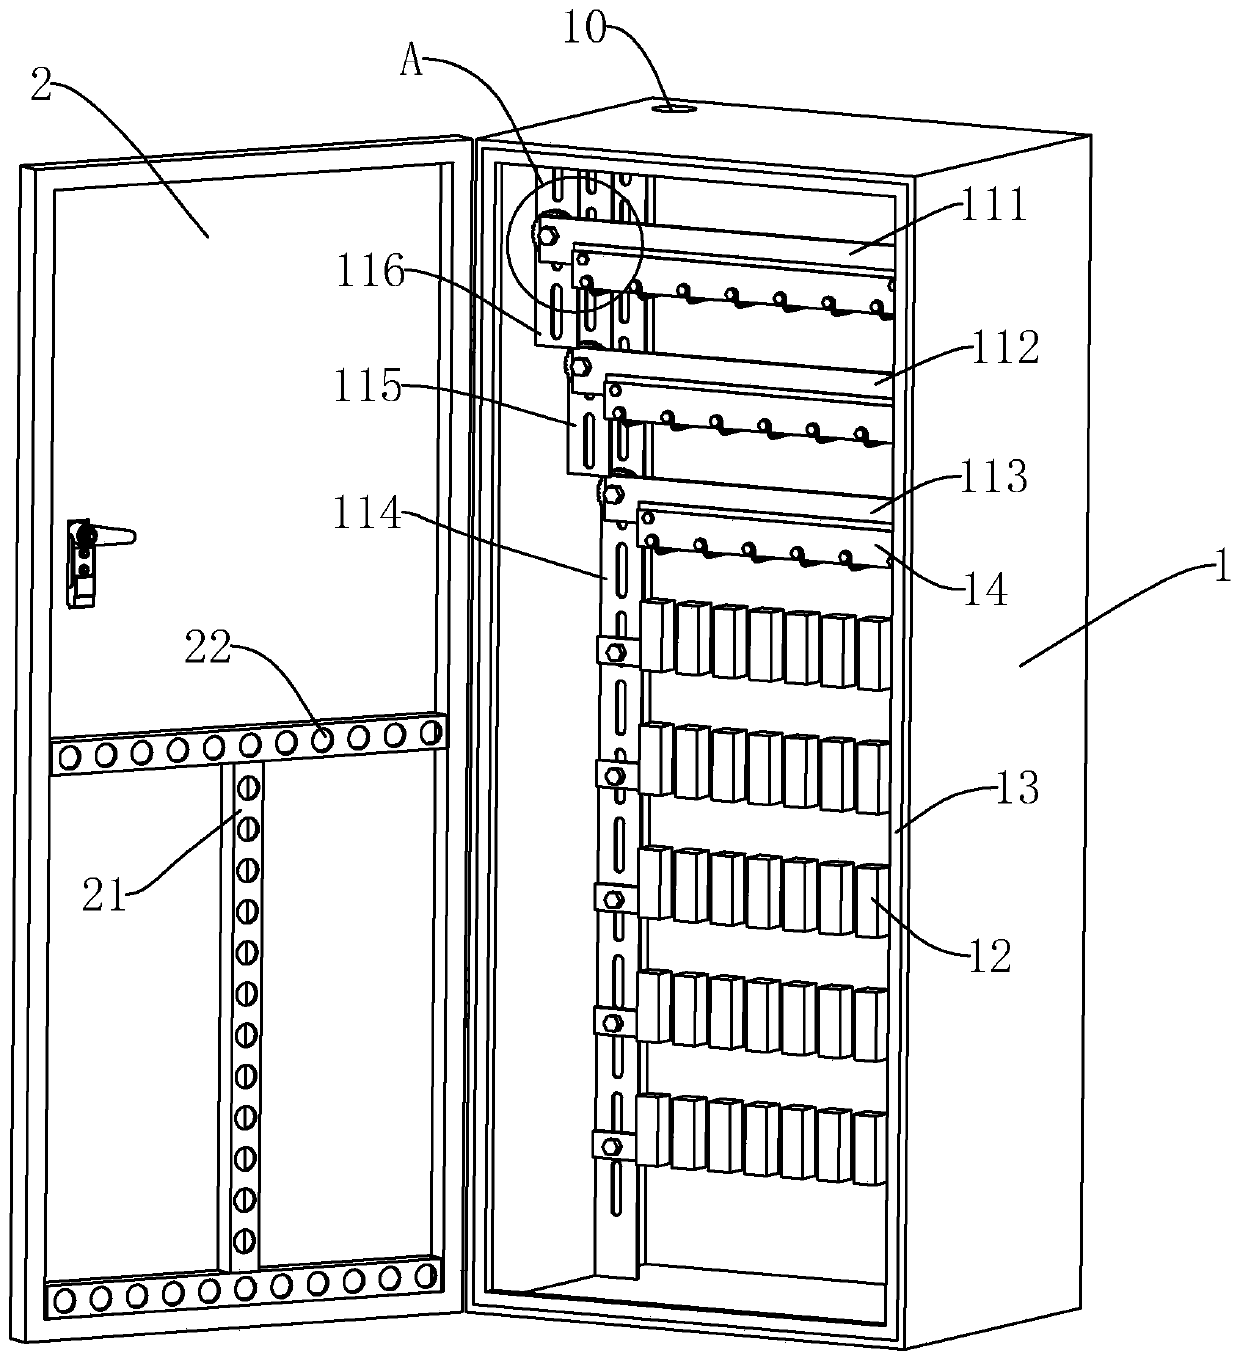 Direct-current power distribution cabinet